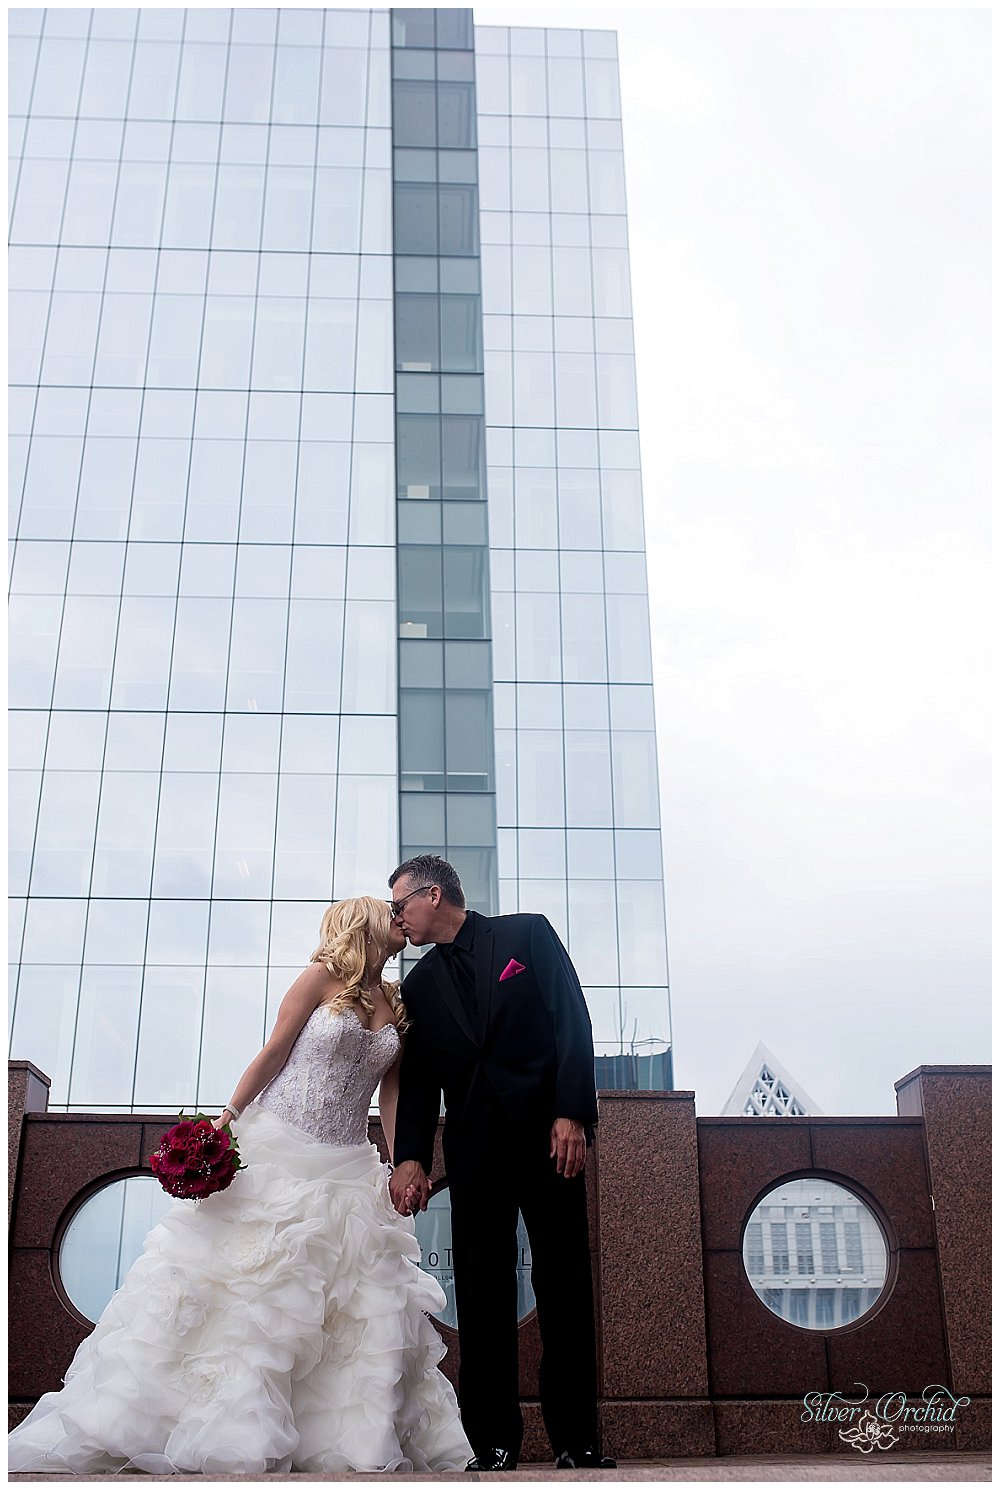 ©Silver Orchid Photography_wedding photography_FooteTopofTower_silverorchidphotography.com_0011.jpg